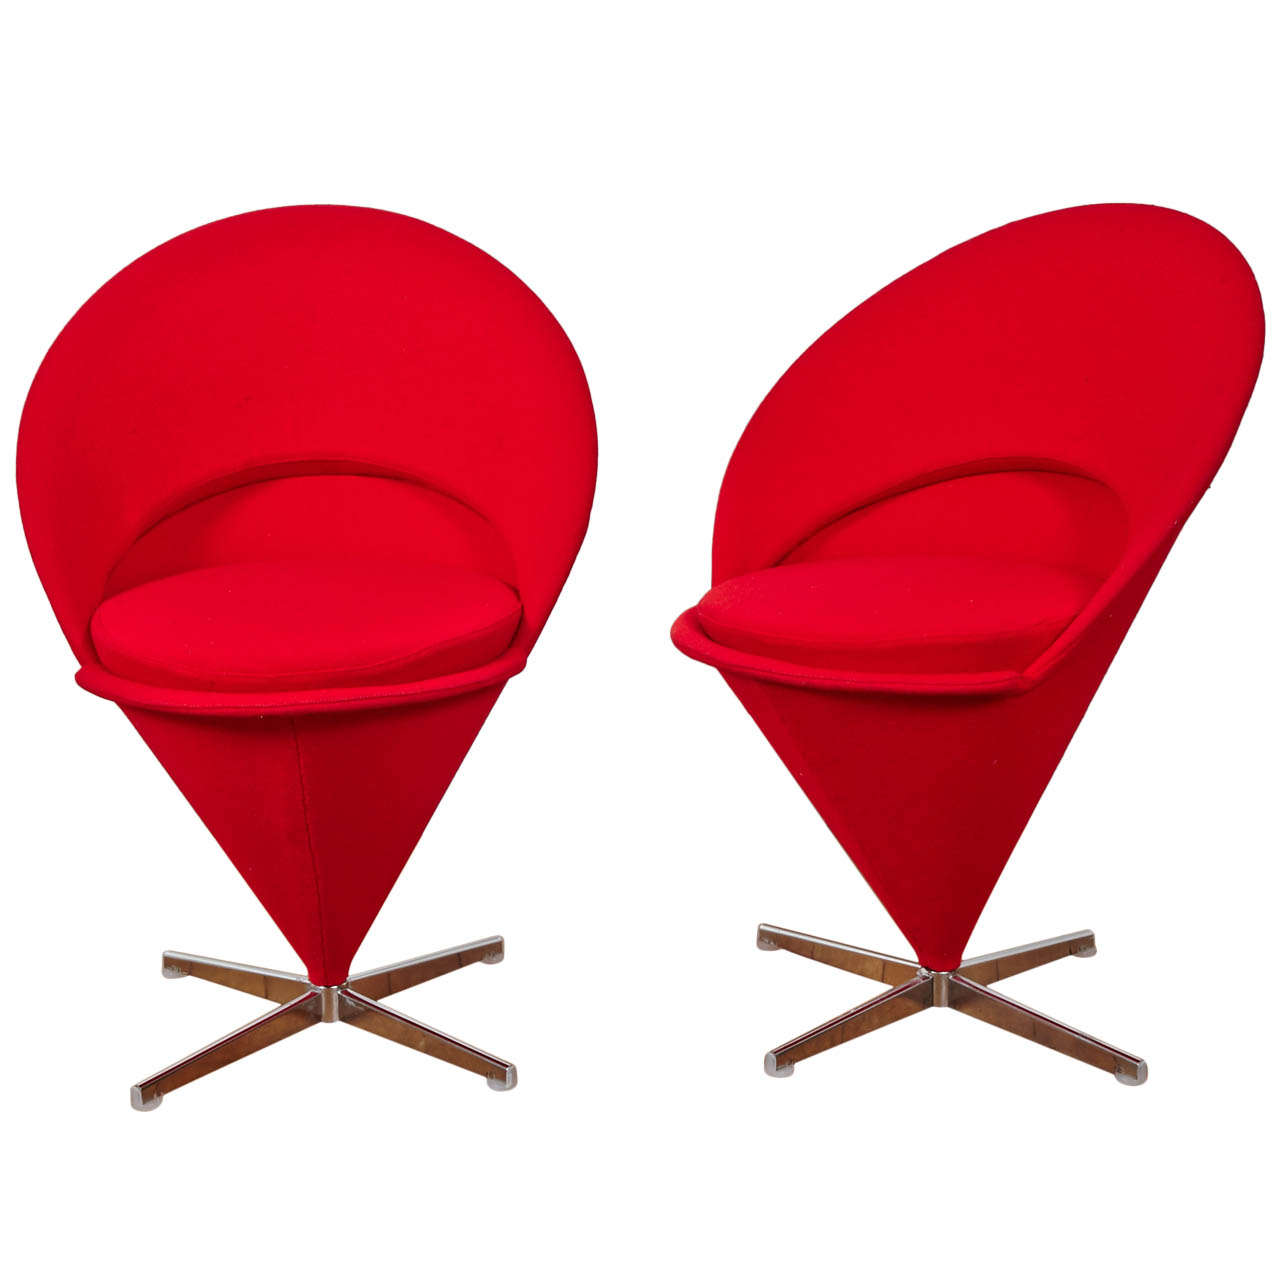 K1 Cone chairs 1958, offered by Galerie Jean-Louis Danant